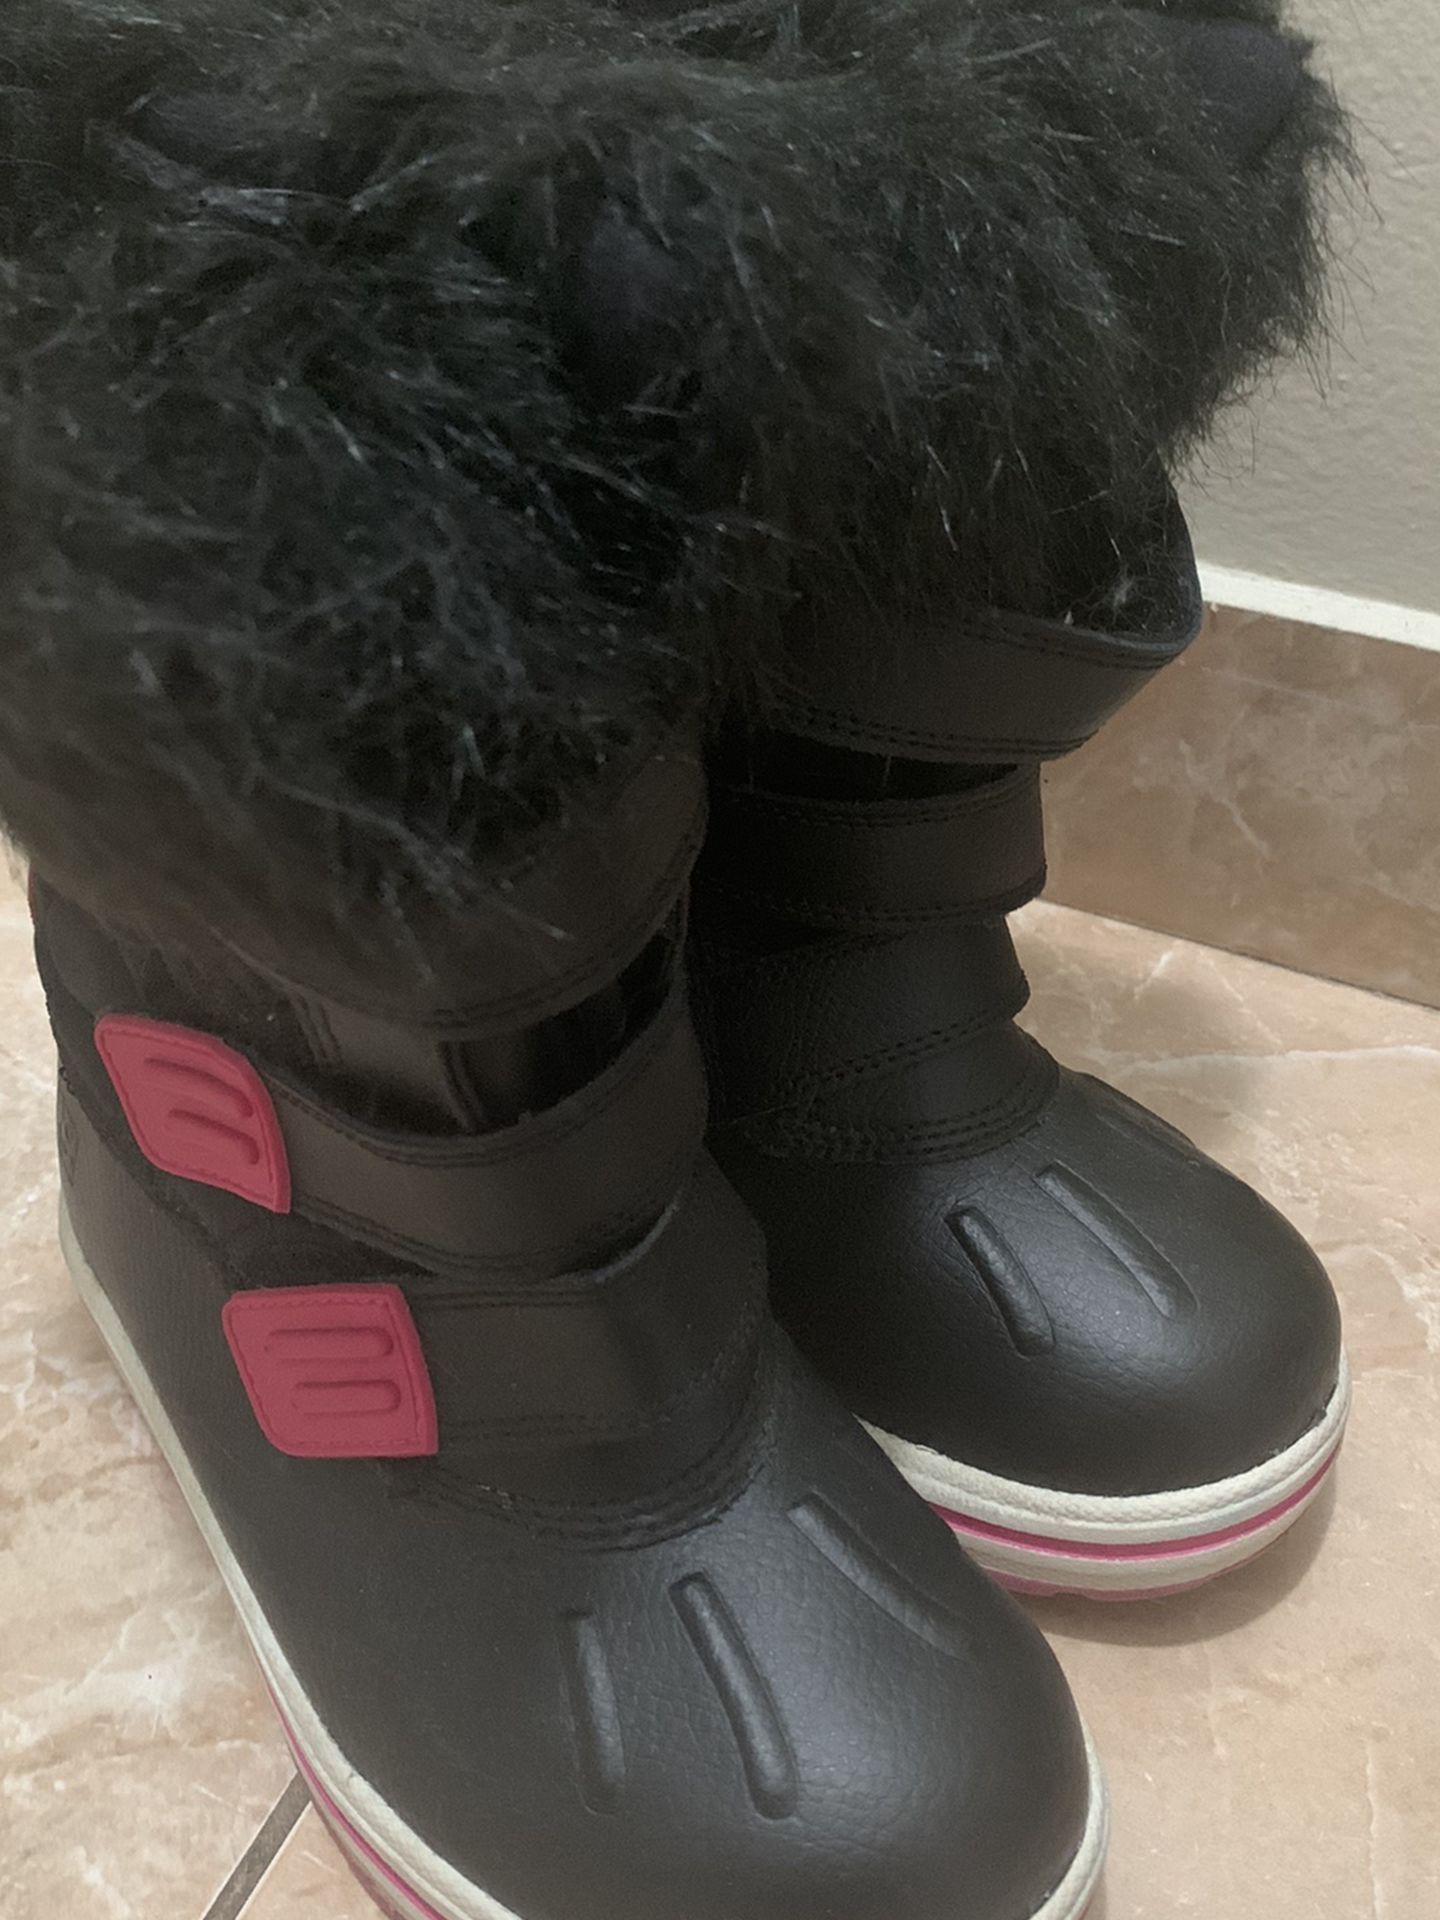 Girls Winter Boots, Size 12